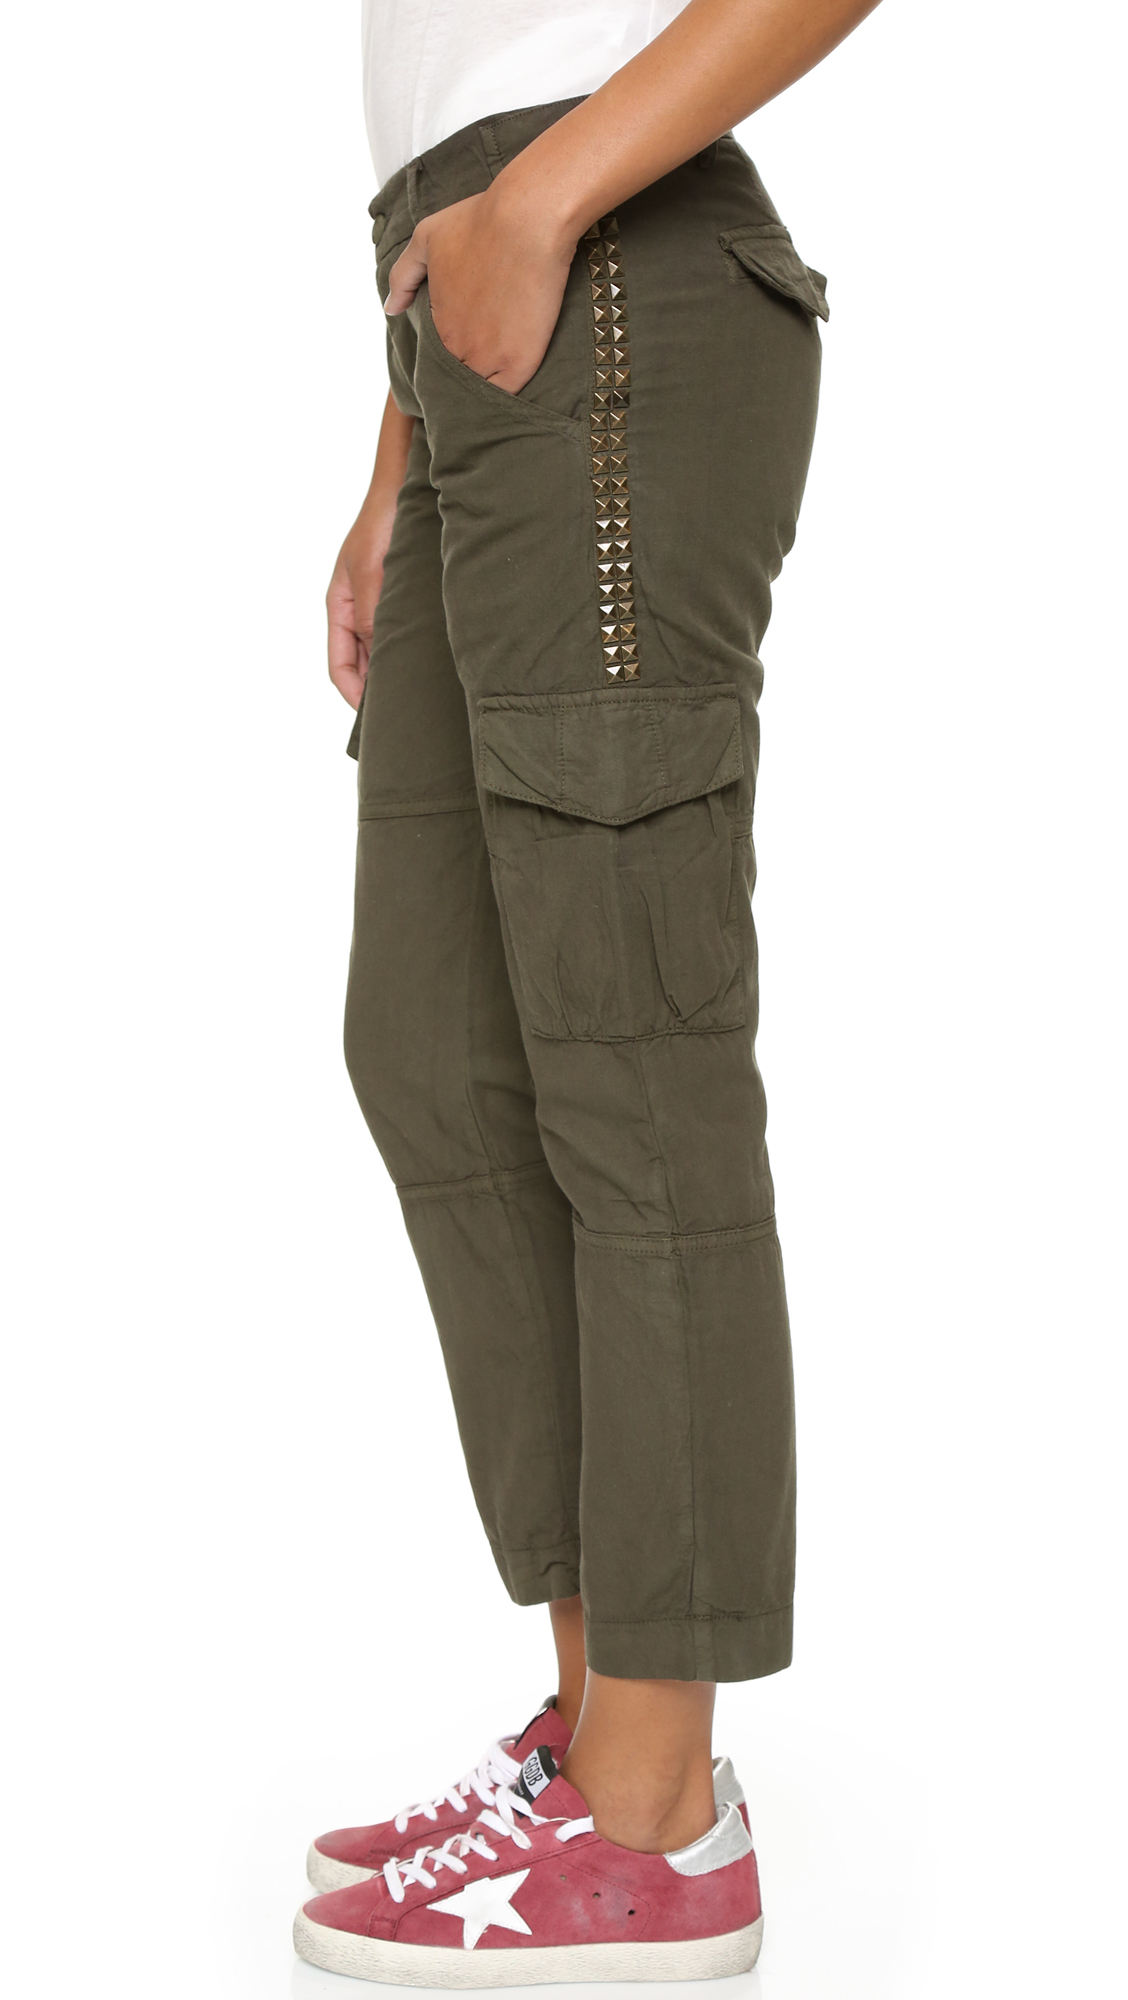 Lyst - Nsf Basquiat Studded Pants in Green